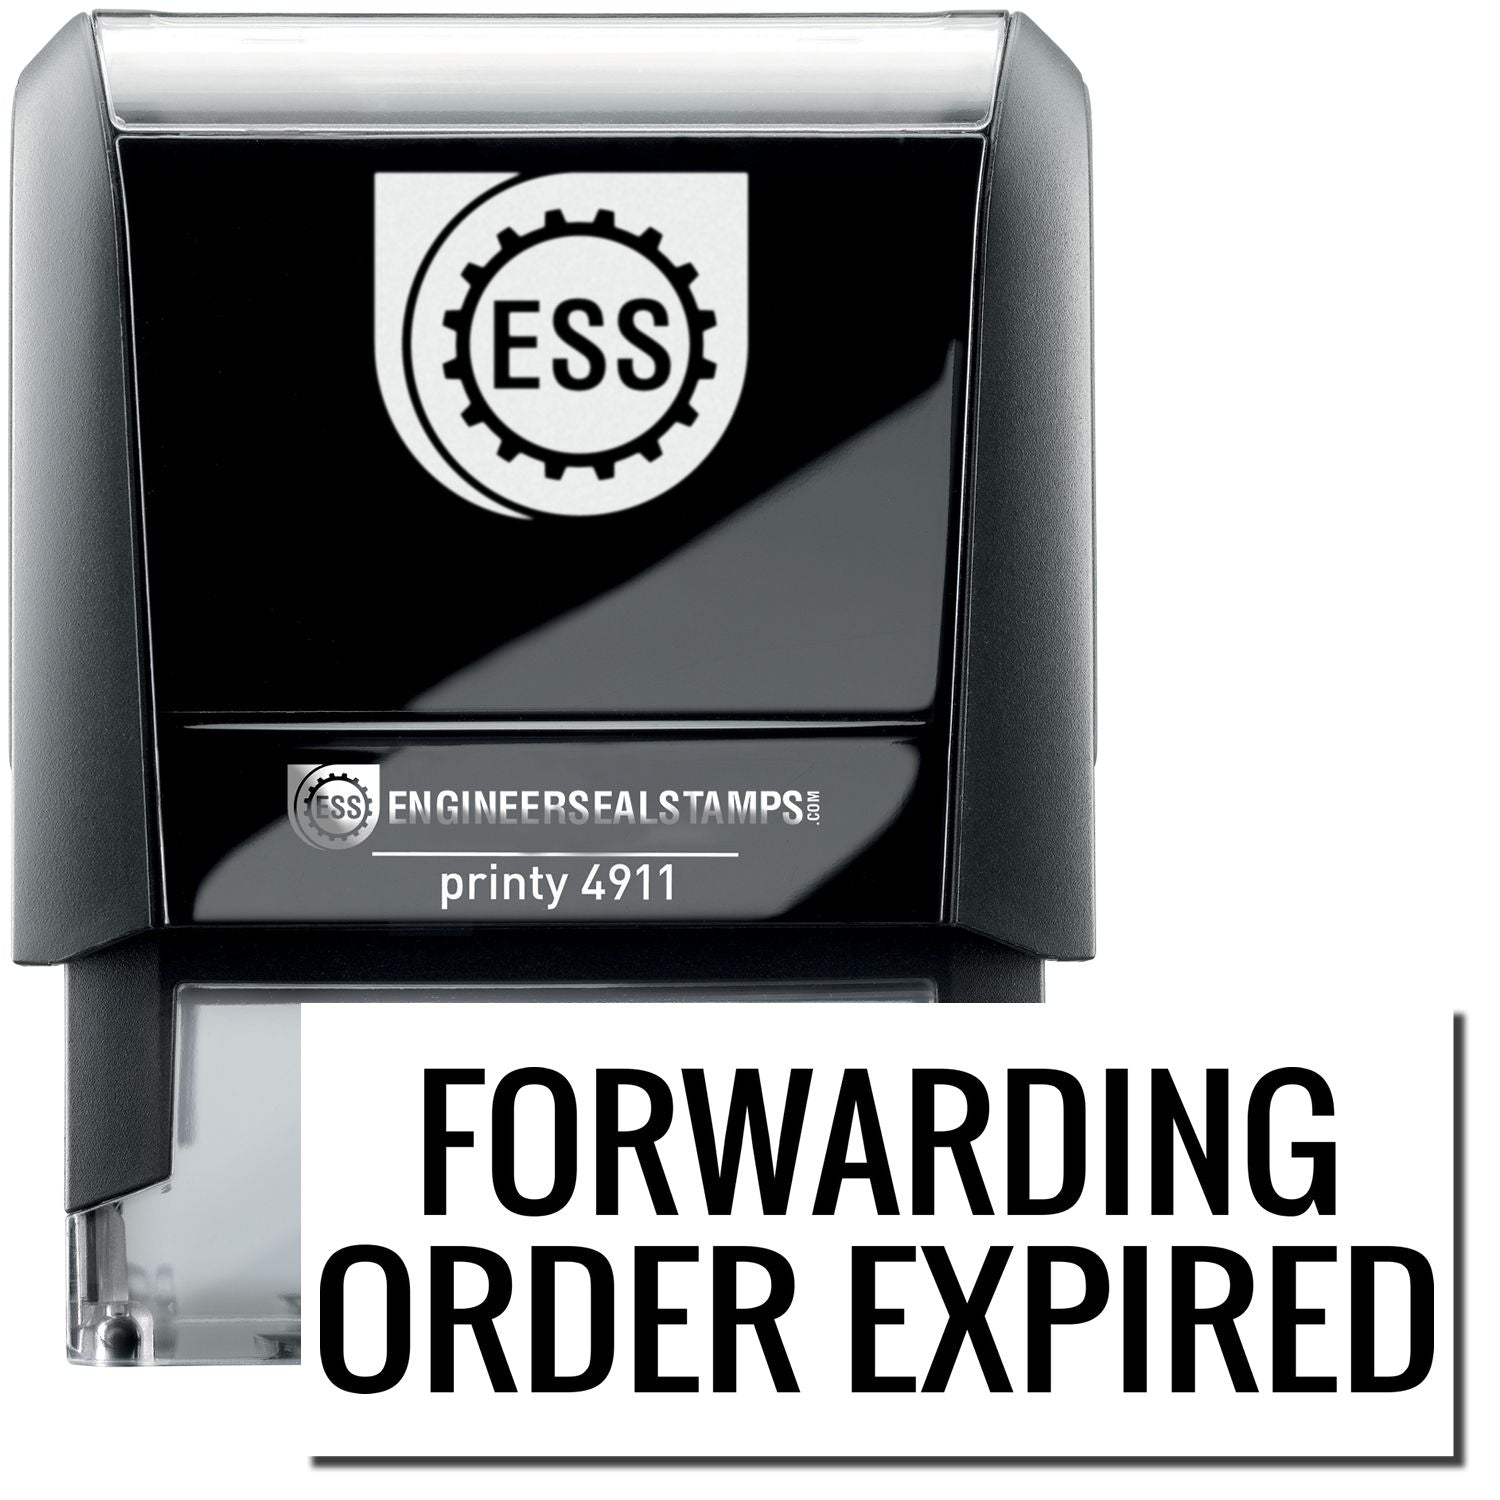 A self-inking stamp with a stamped image showing how the text "FORWARDING ORDER EXPIRED" is displayed after stamping.